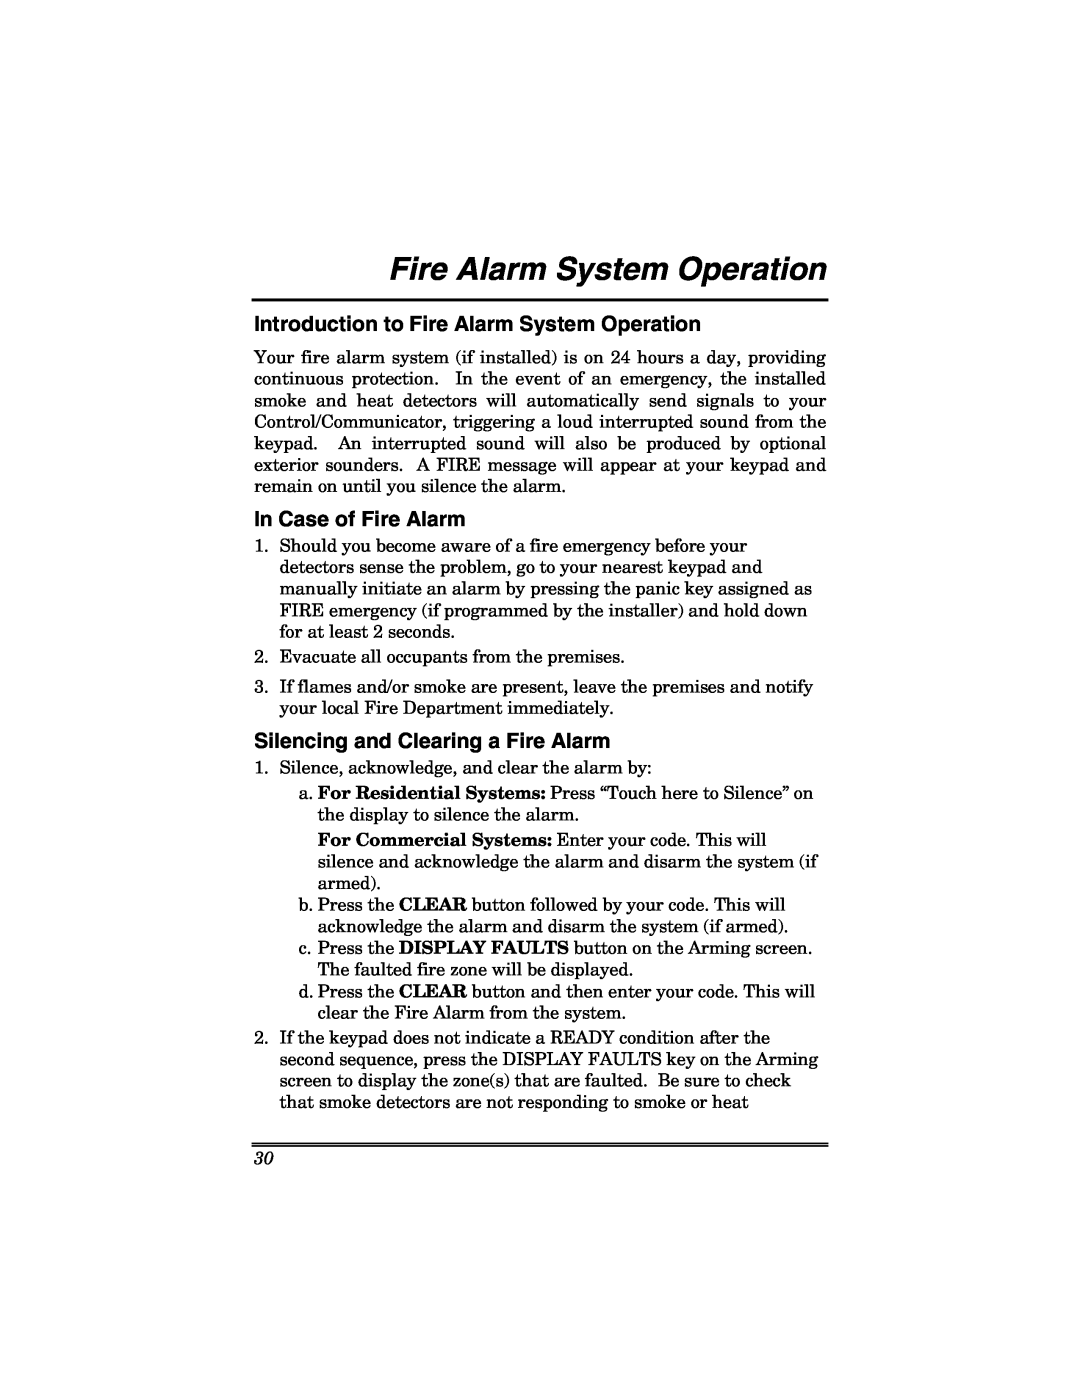 Honeywell 6271 Introduction to Fire Alarm System Operation, In Case of Fire Alarm, Silencing and Clearing a Fire Alarm 